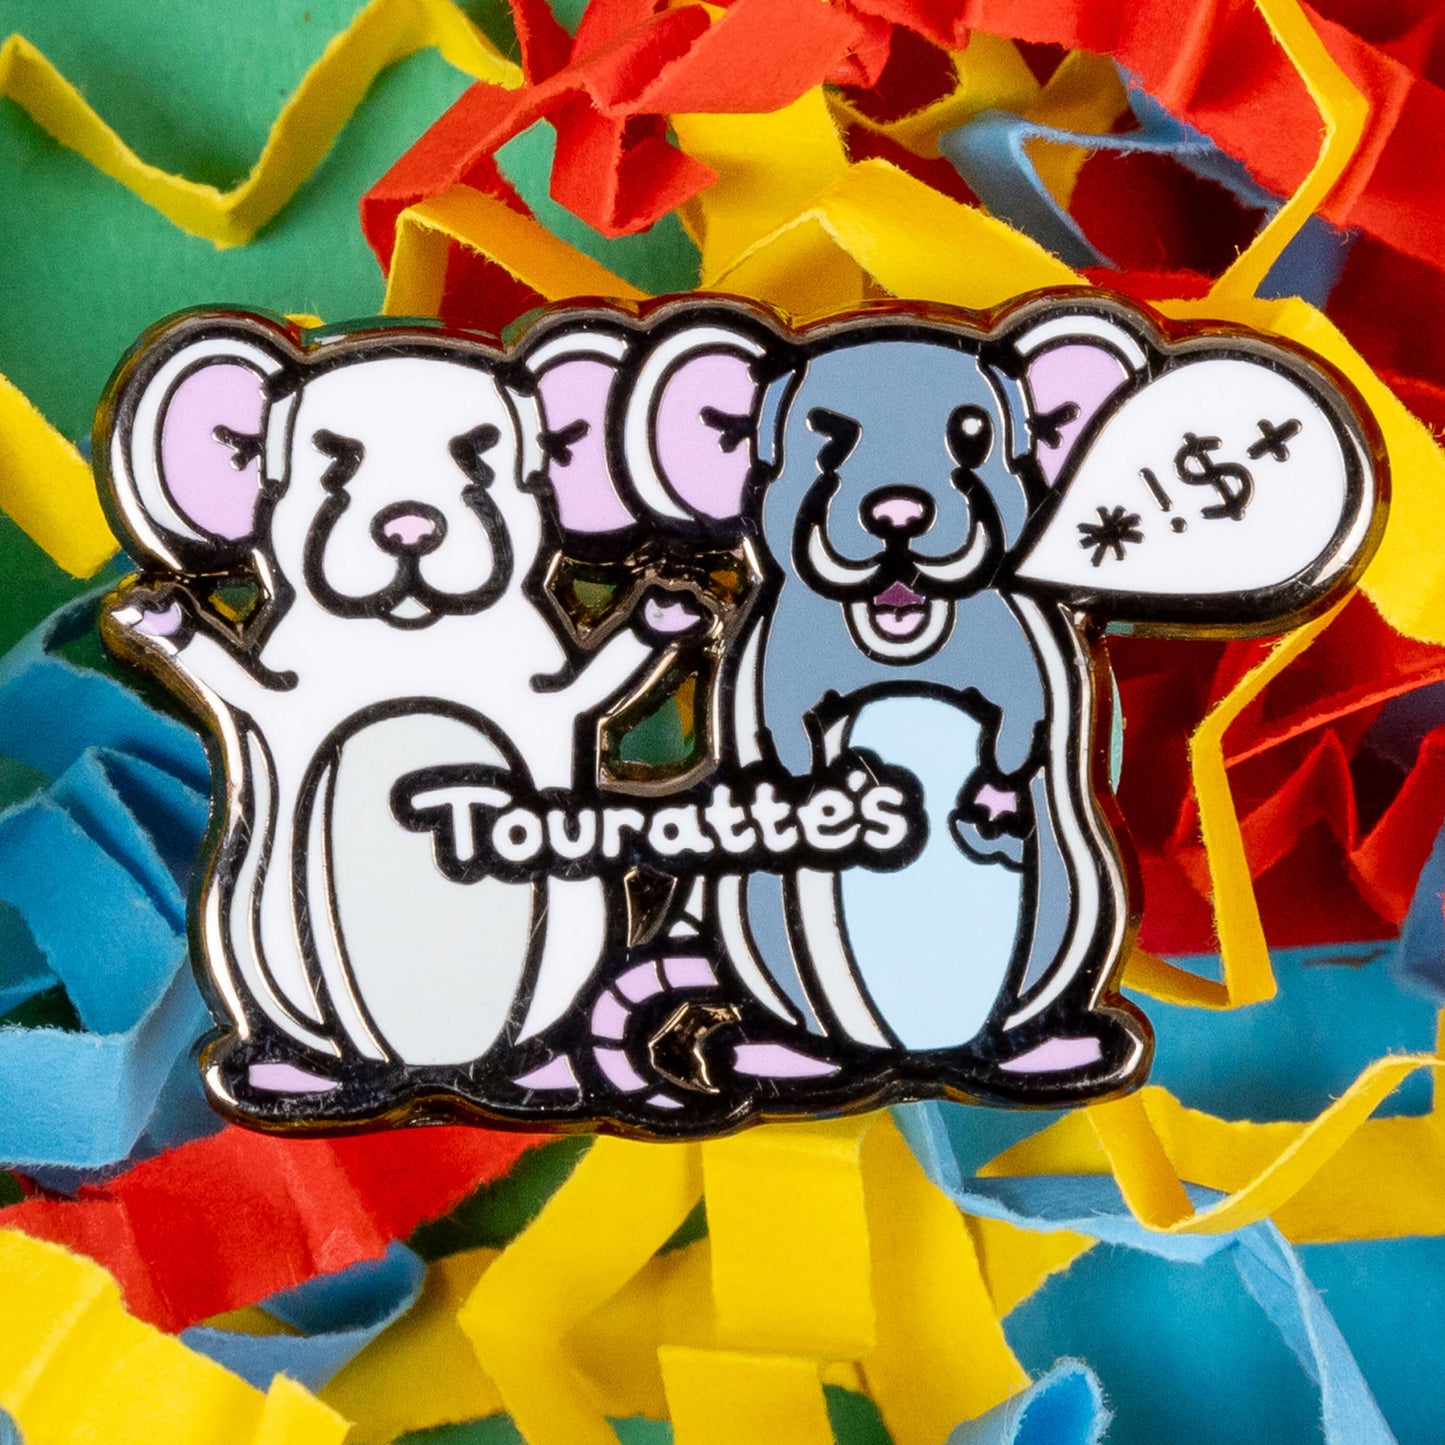 The Touratte's Rat Enamel Pin - Tourette's Syndrome on a red, blue and yellow paper background. The enamel pin is of two rats with pink ears and feet, the white rat on the left is raising its arms with its eyes closed and the grey rat on the right has a speech bubble with symbols in, across both rats reads 'touratte's'. The hand drawn design is raising awareness for tics and tourettes.